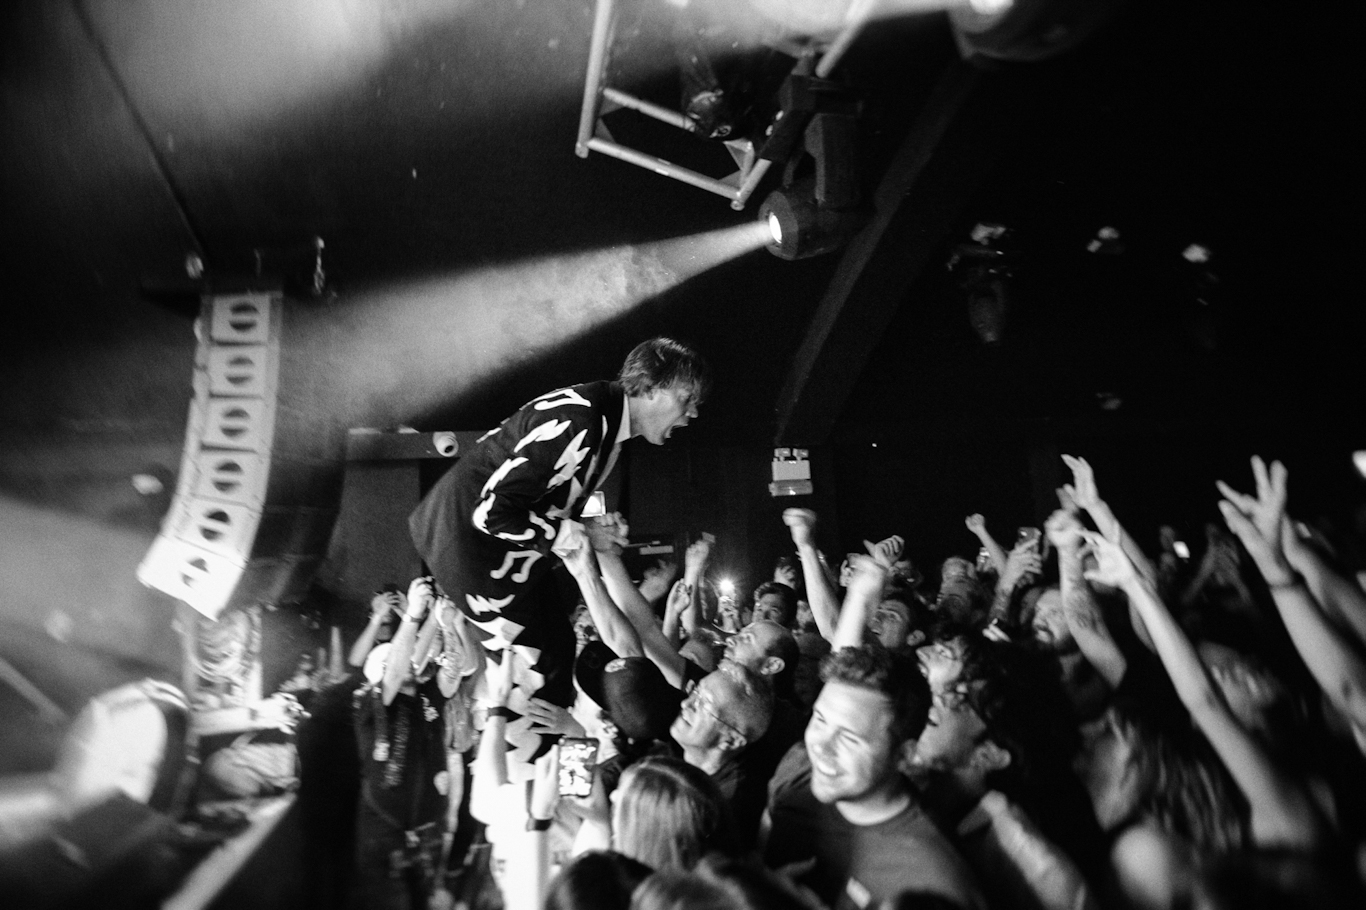 IN FOCUS// The Hives @ The Garage, London Credit: Denise Esposito